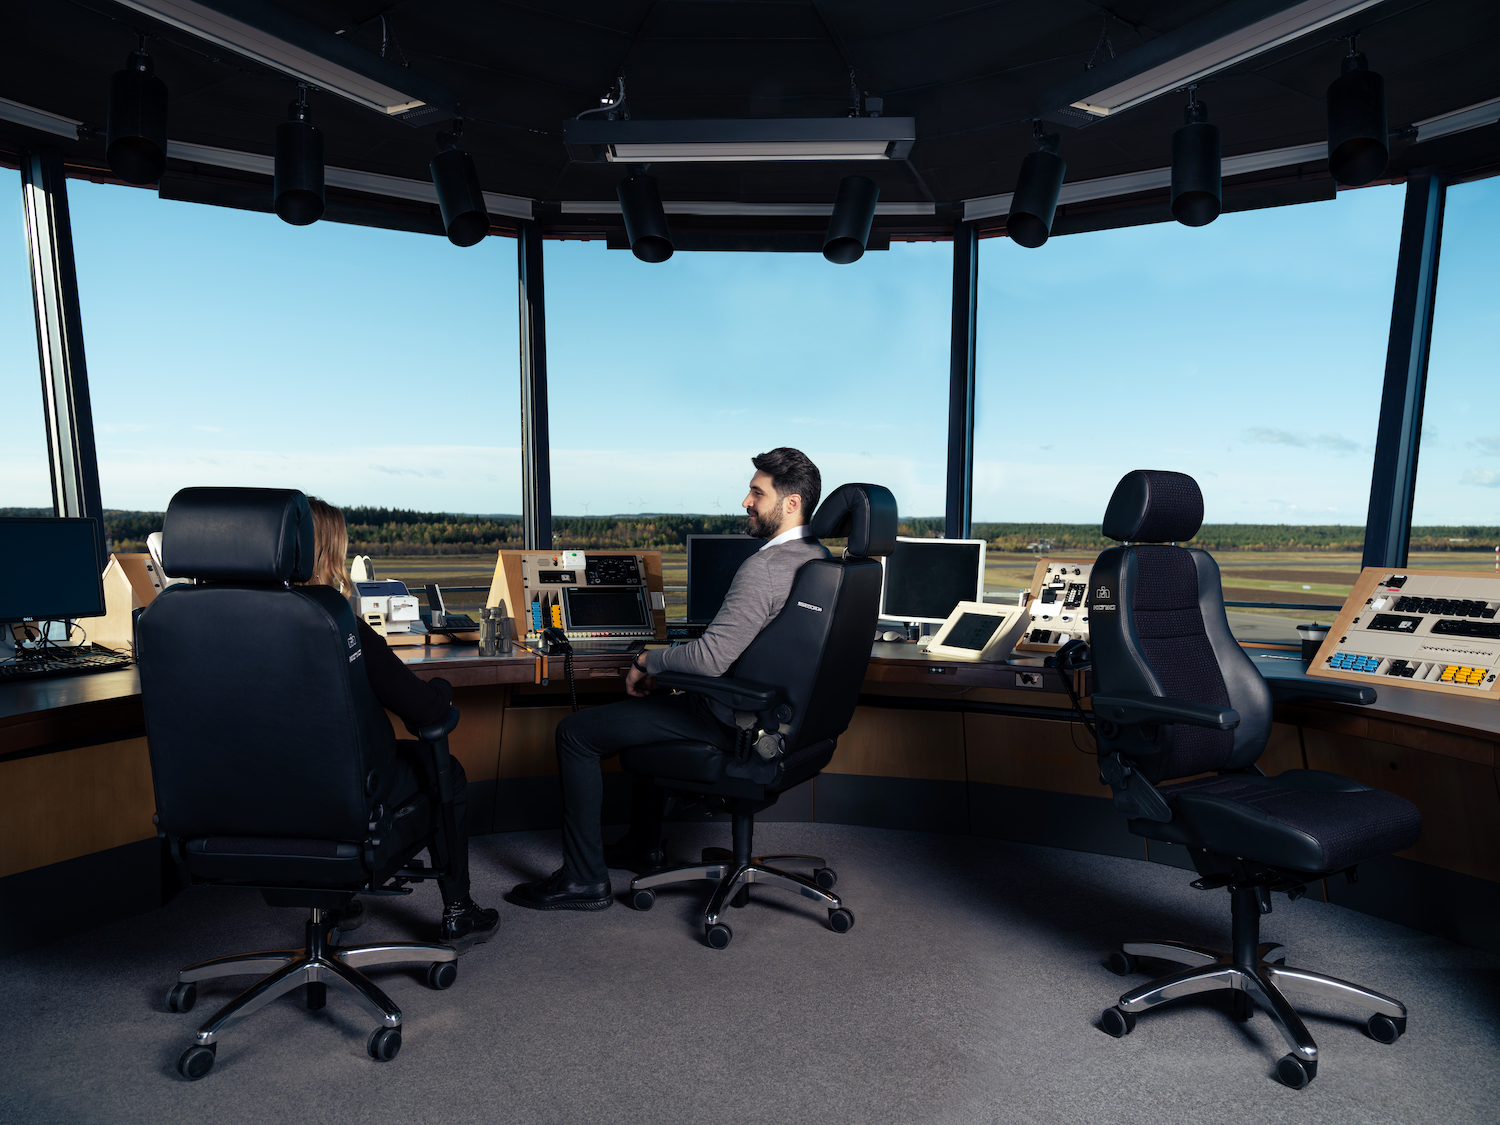 People sitting in RH Secur24 24/7 chairs in a control tower